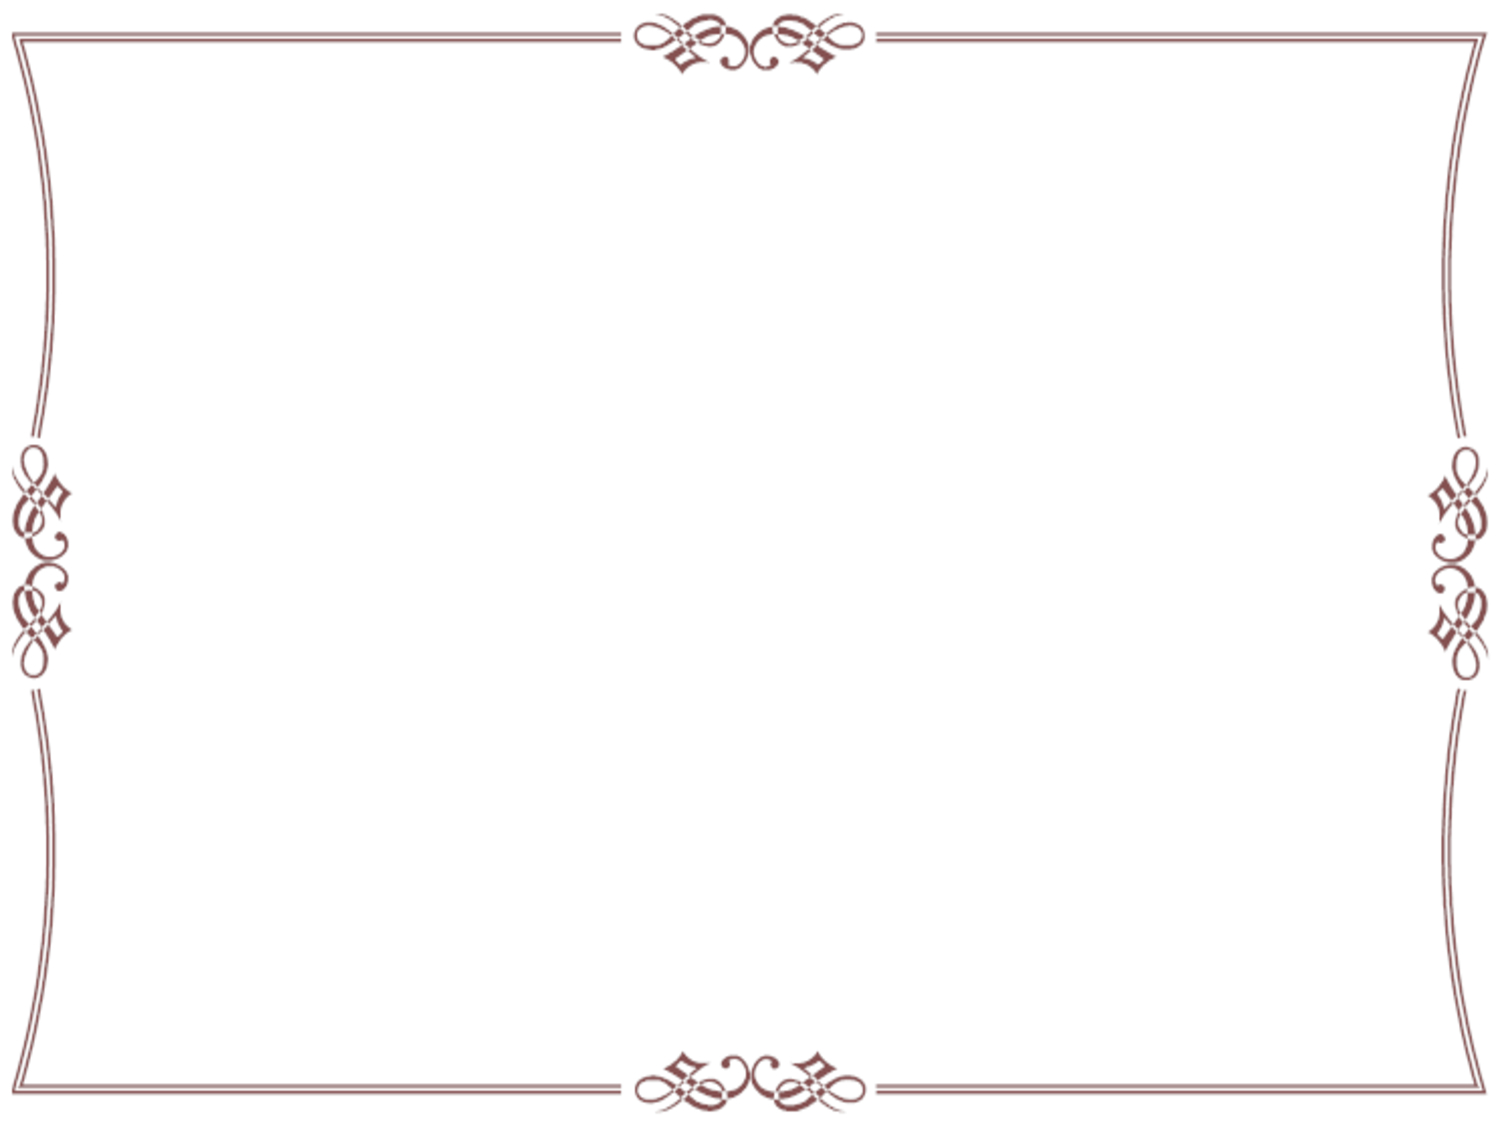 Free Certificate Border, Download Free Clip Art, Free Clip With Regard To Free Printable Certificate Border Templates